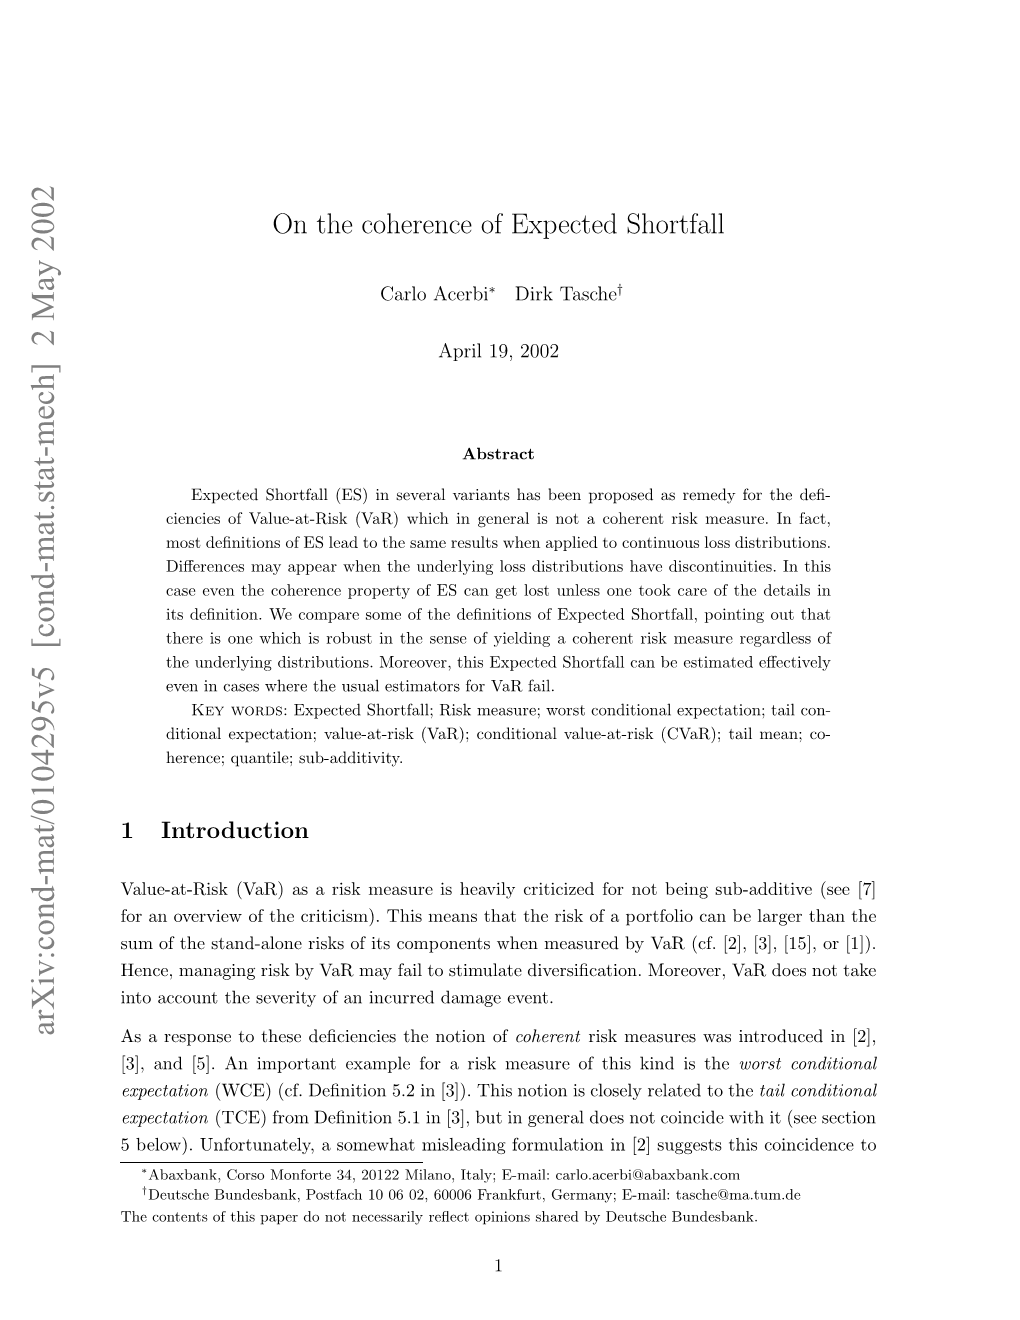 Coherence of Expected Shortfall